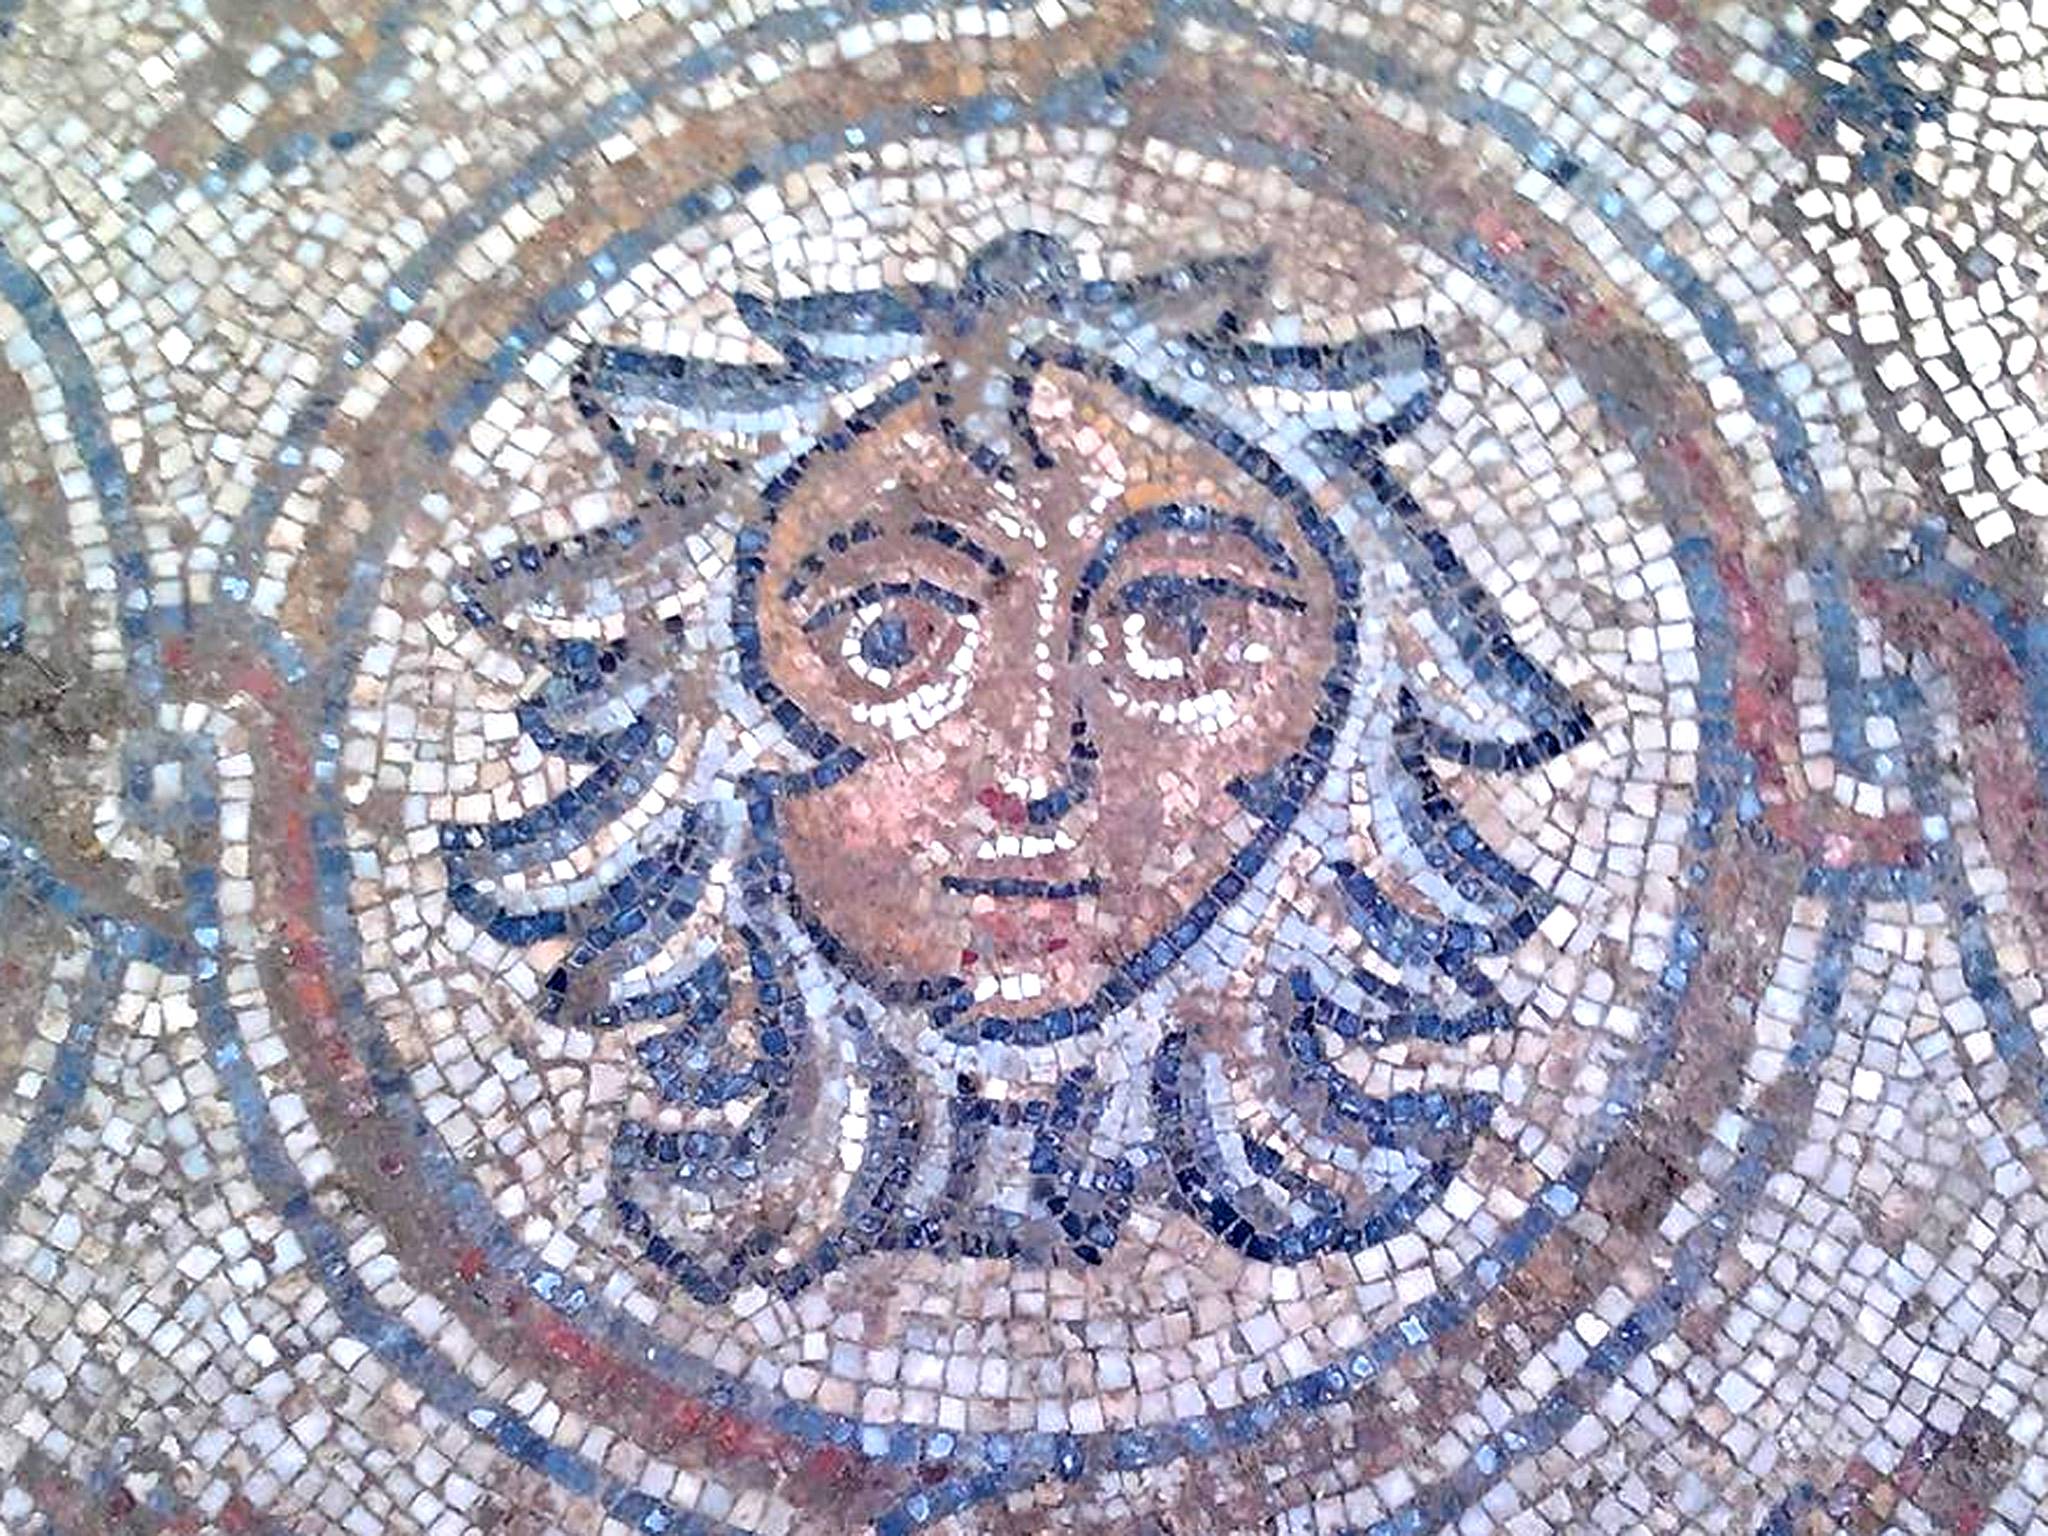 A sixth-century Byzantine mosaic near Raqqa on the Euphrates which was blown up by the Islamic State of Iraq and the Levant, opposed to the depiction of the human form, in January